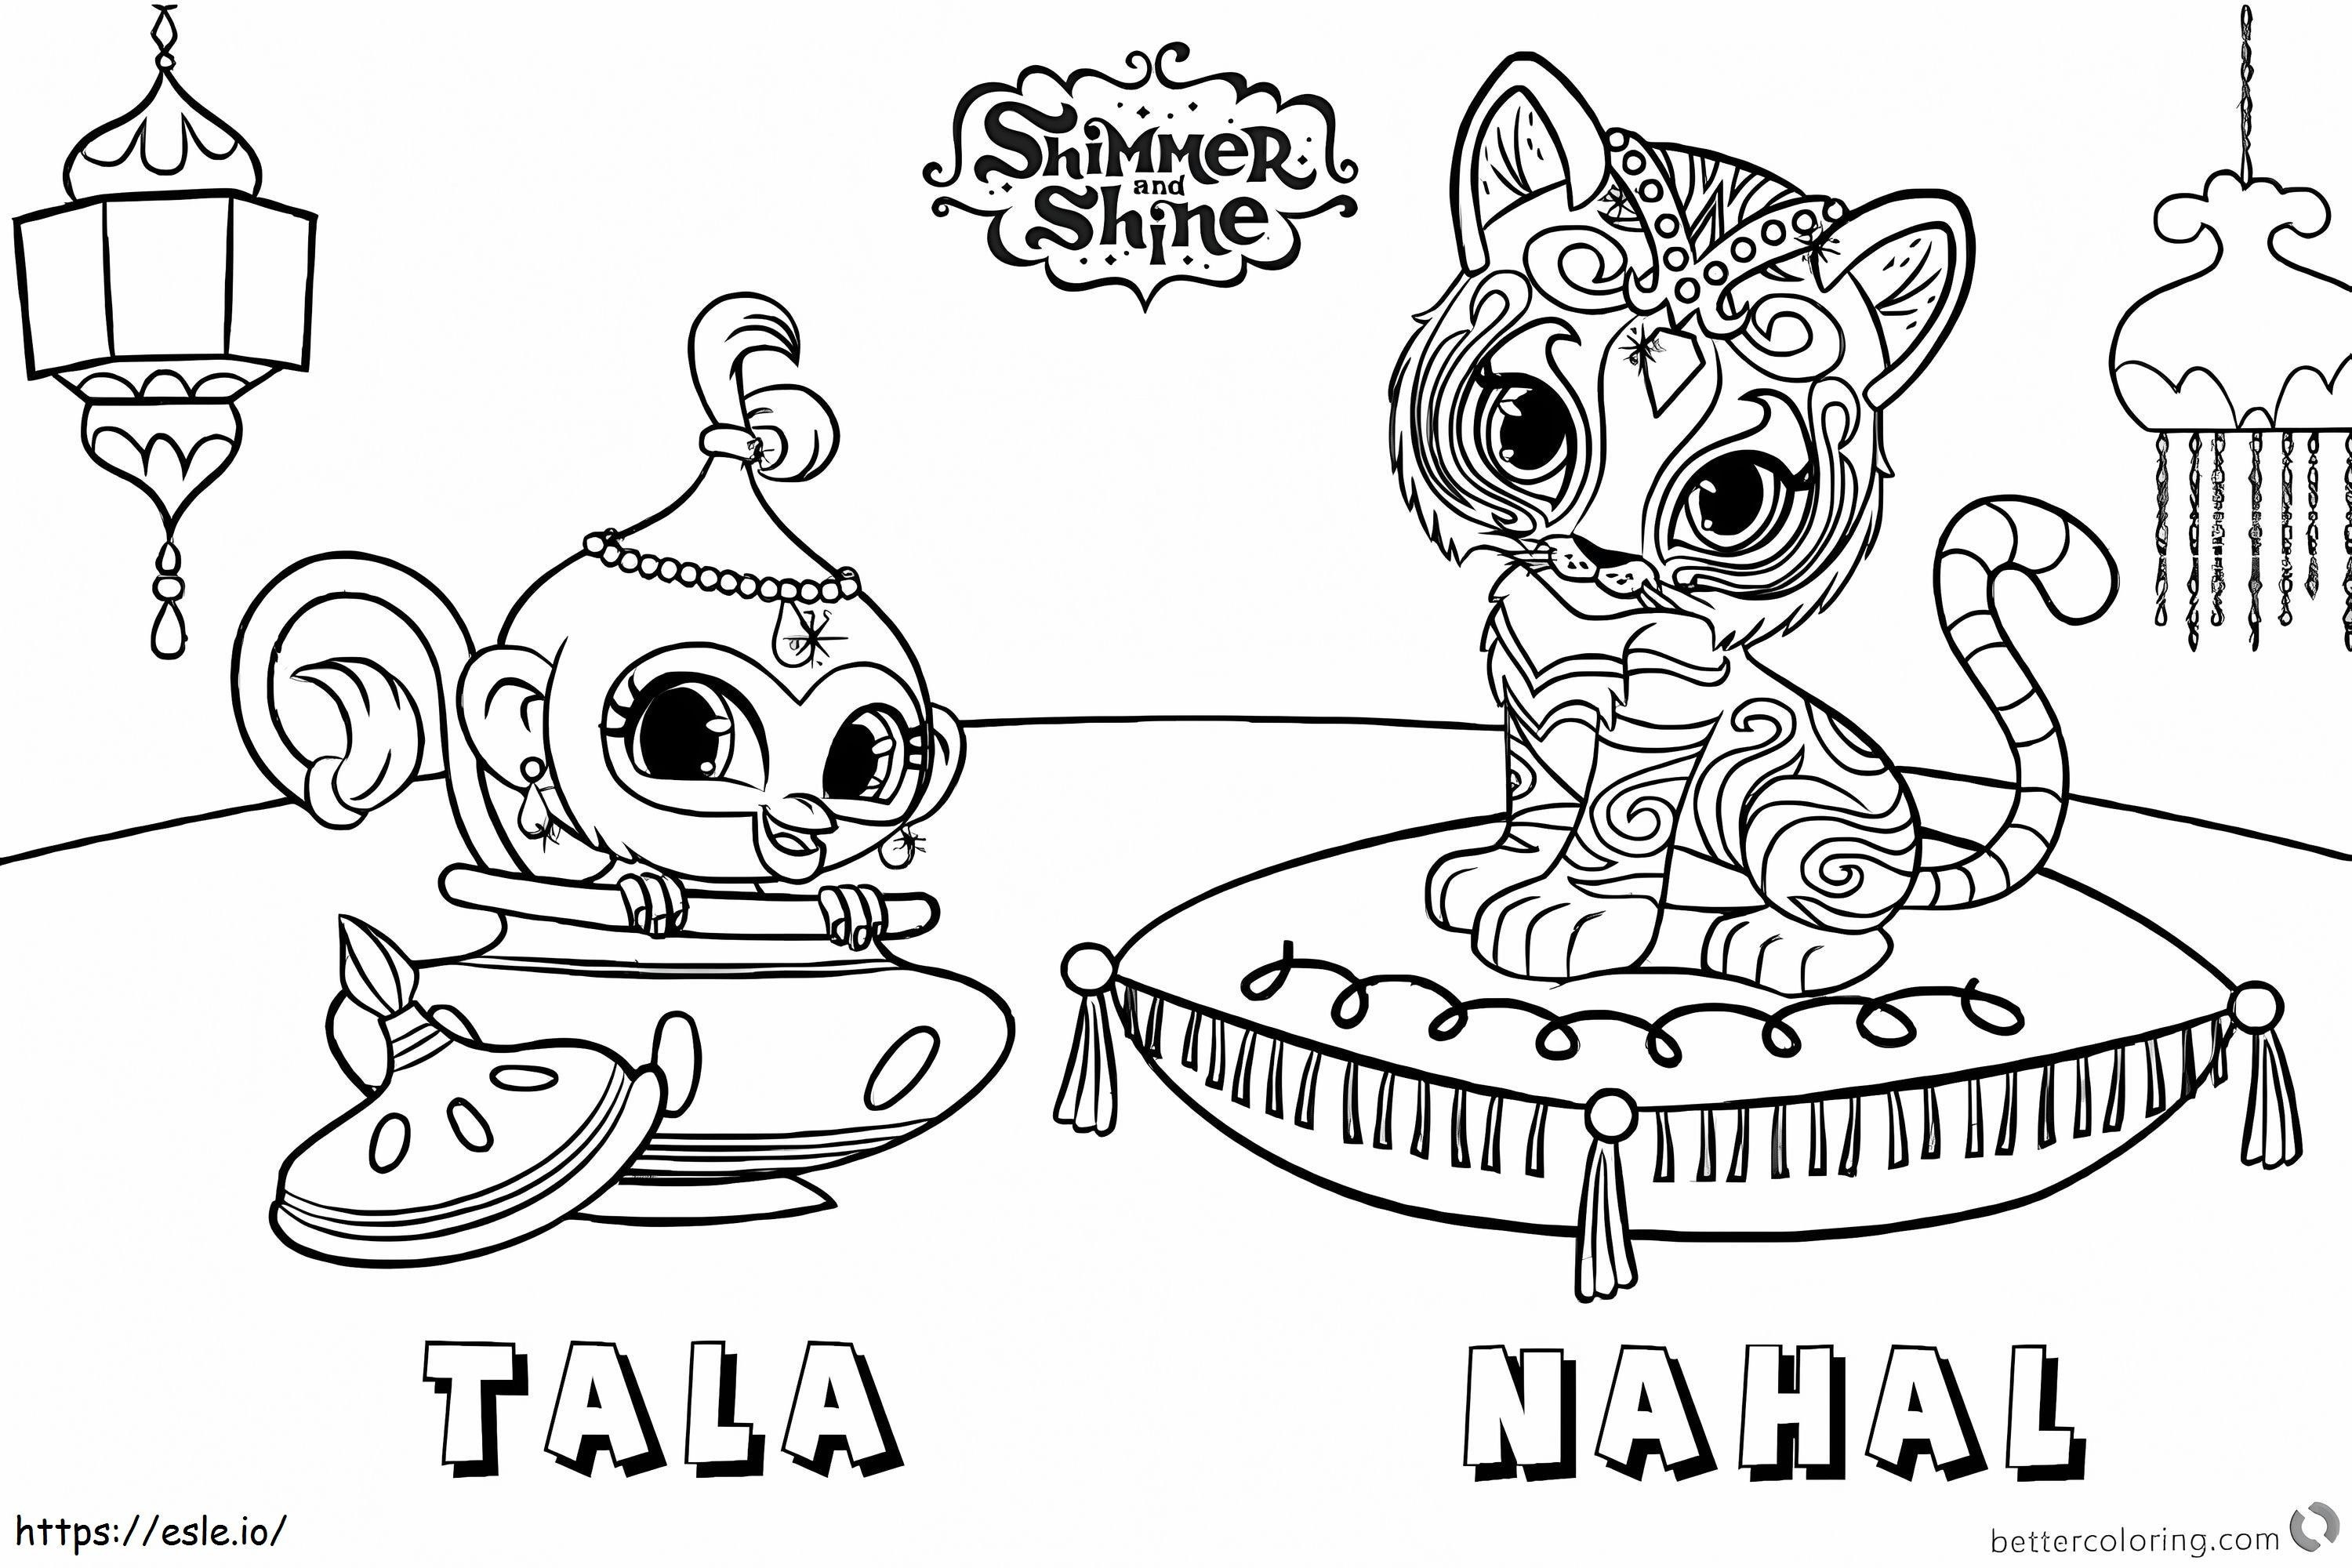 1571626975 Shimmer And Shine Free Lovely 20 Awesome Shimmer And Shine Of Shimmer And Shine Free coloring page